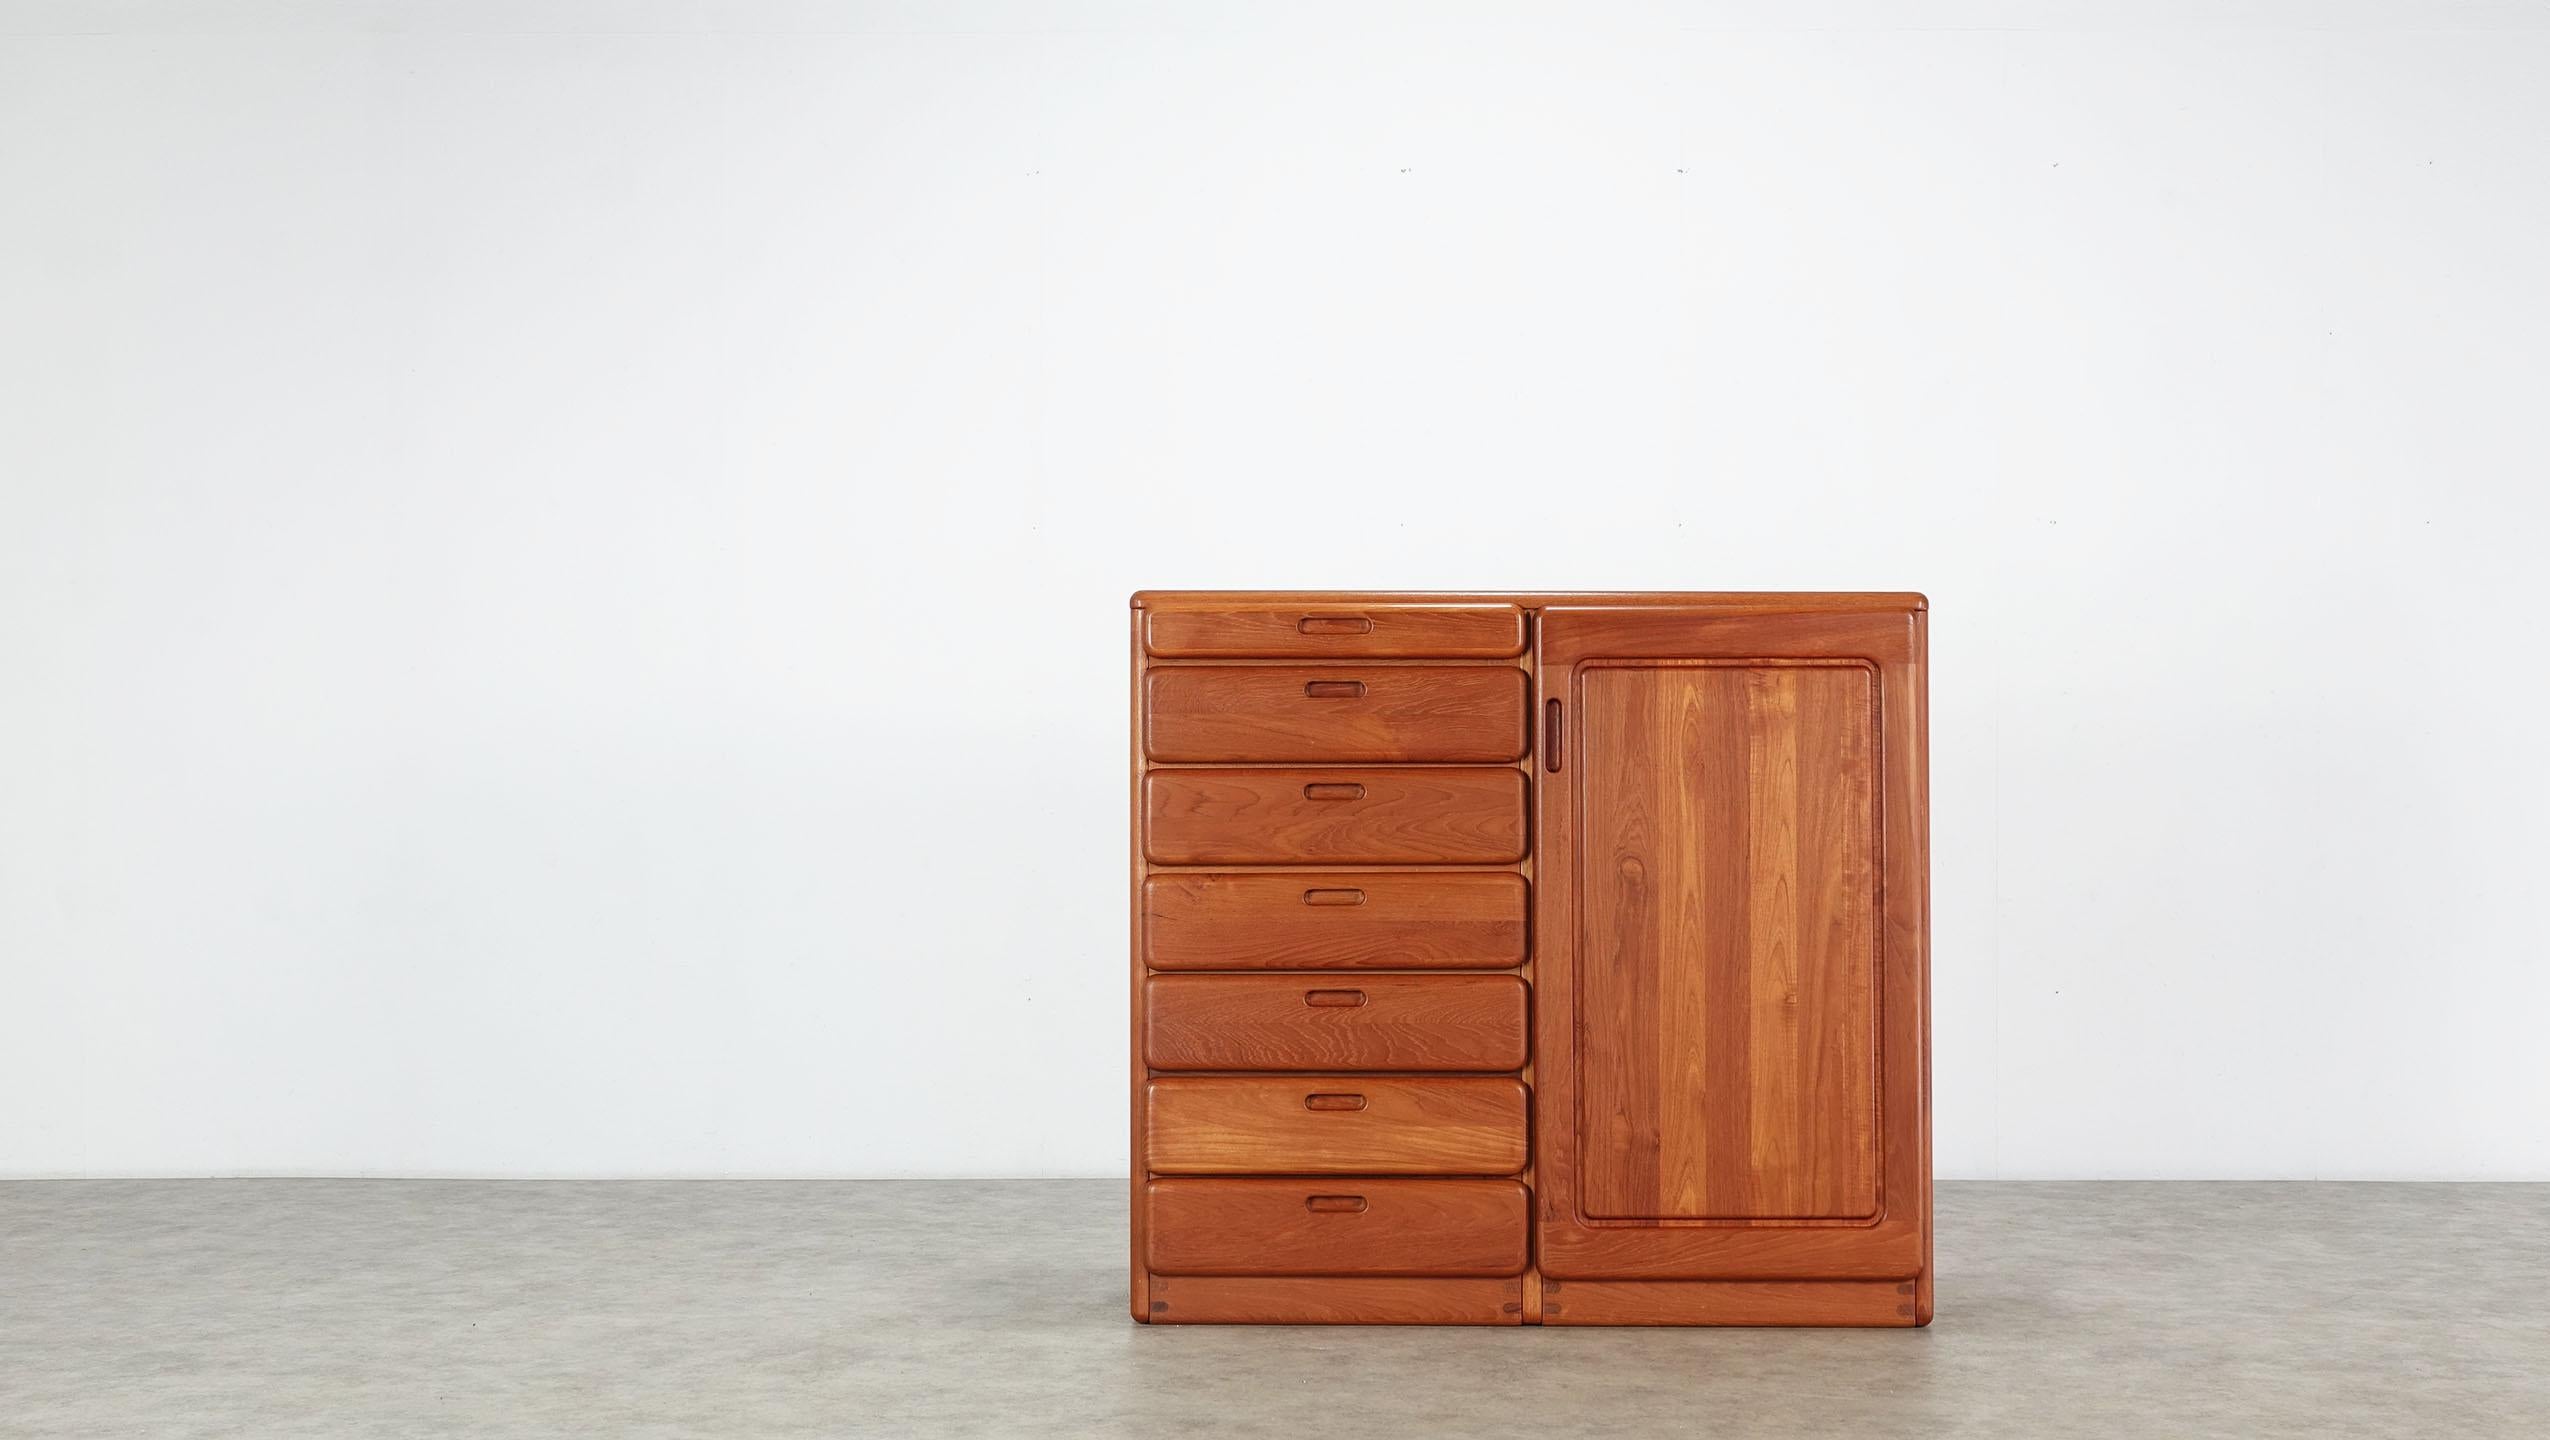 Teak Chest with Drawers and Compartments Langeskov Møbelfabrik A / S Denmark For Sale 2